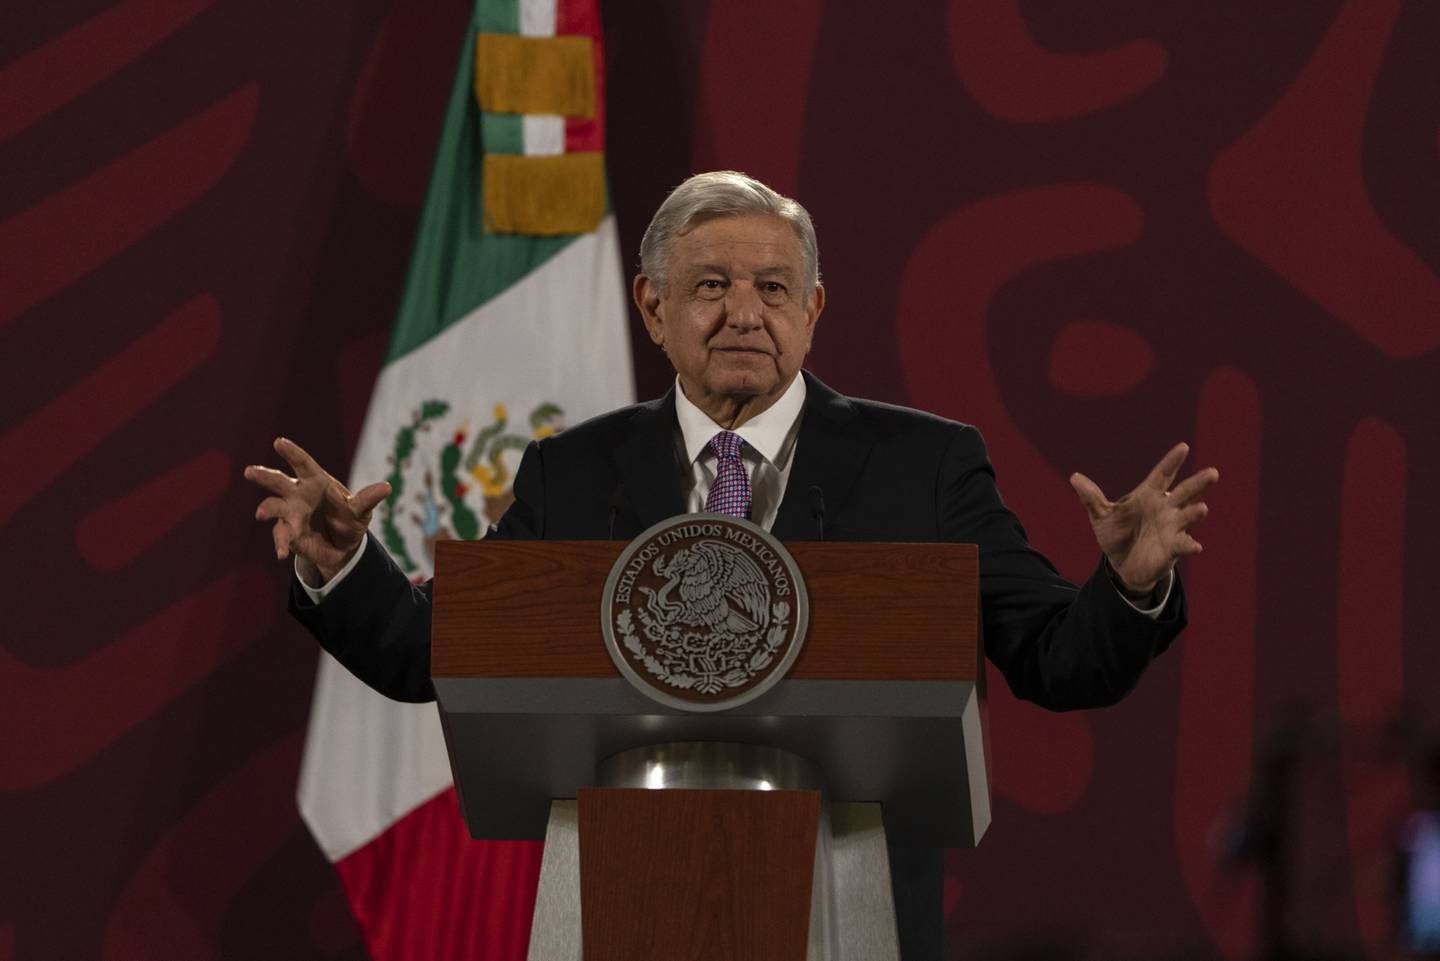 AMLO has 15 months left to fulfill his promise to transform Mexico.